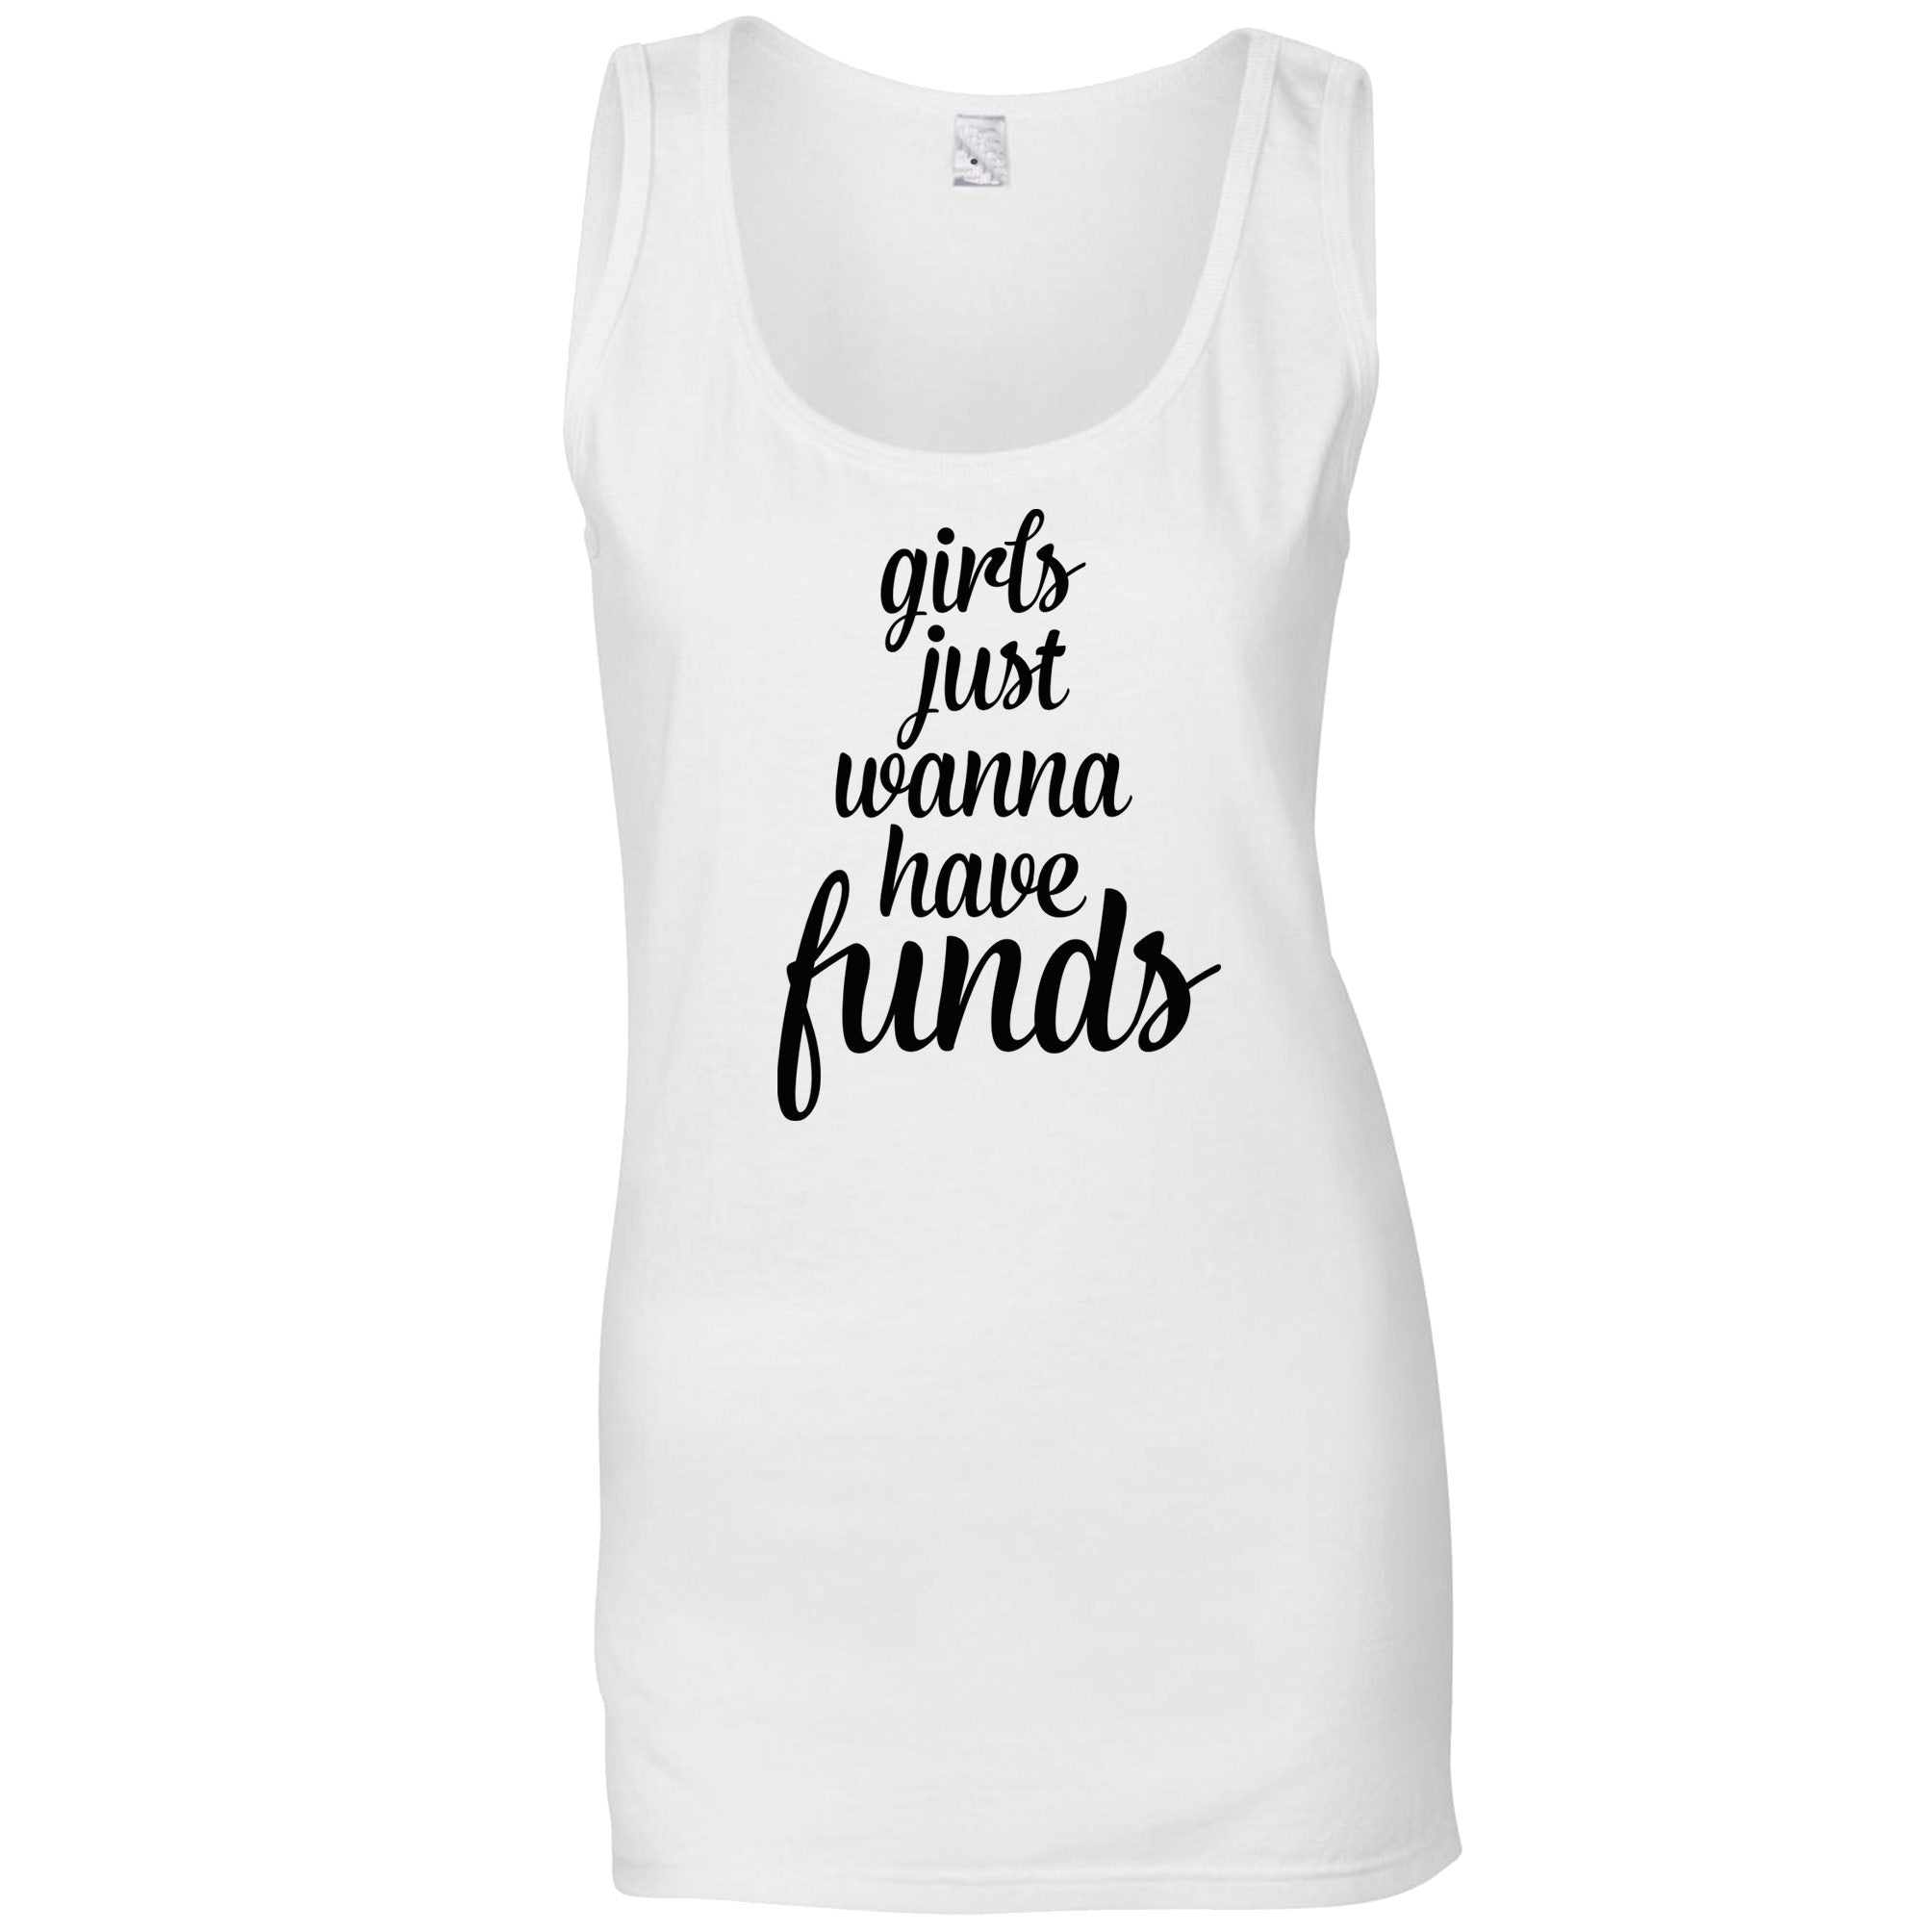 Novelty Ladies Vest Girls Just Wanna Have Funds Pun Top Shirtbox 1551